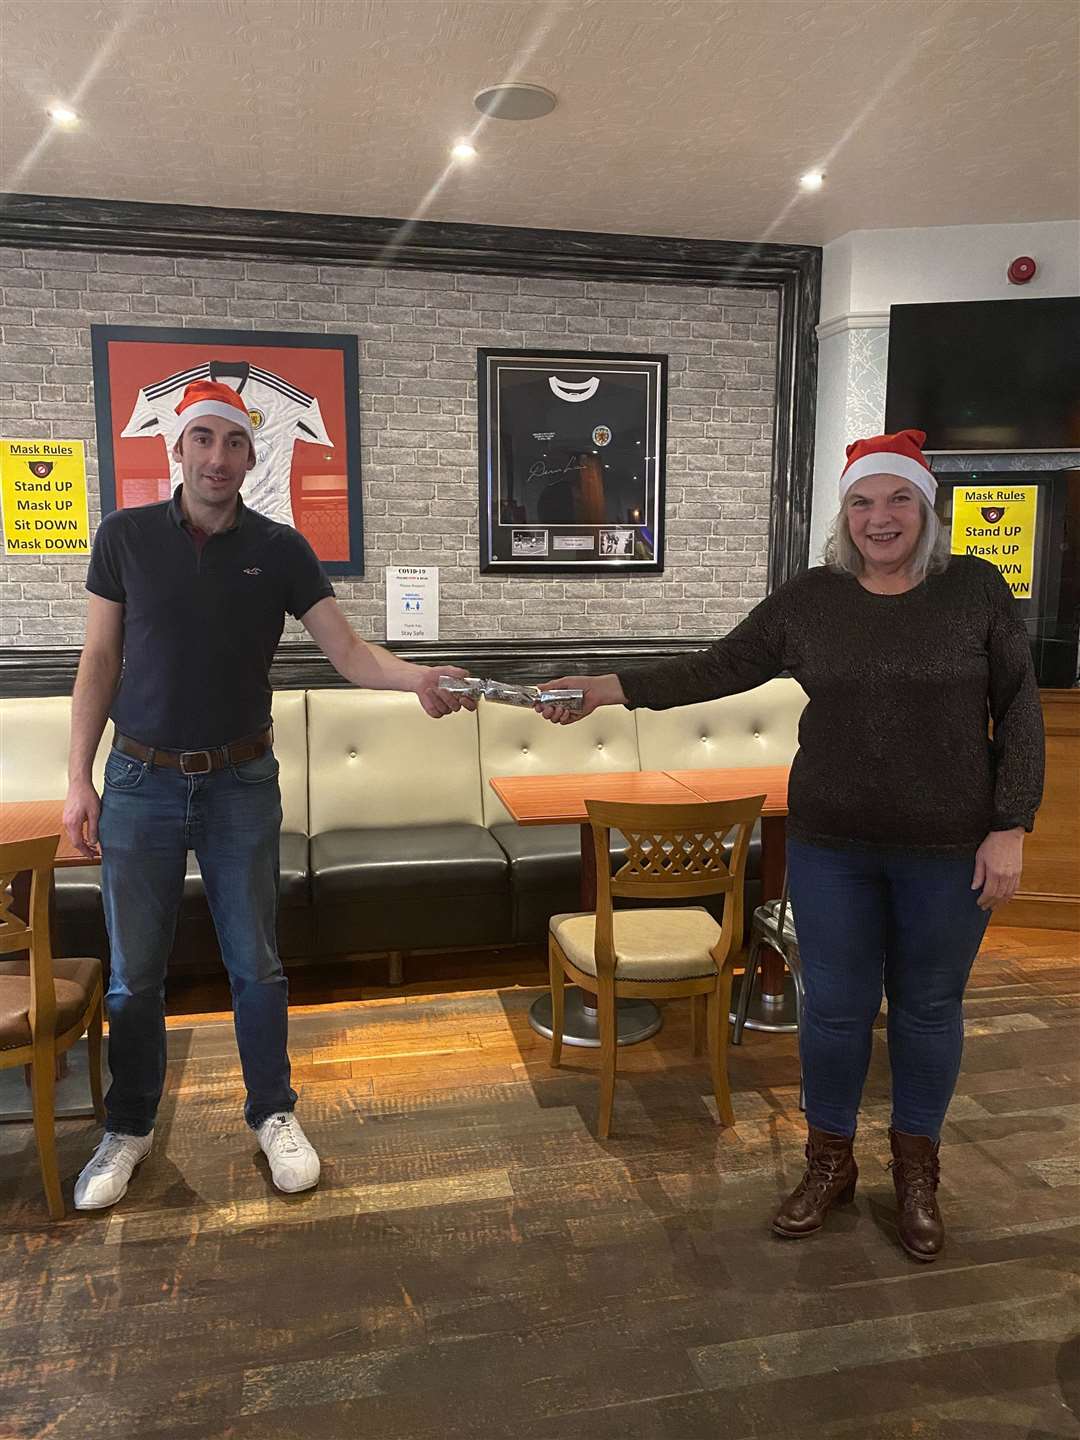 Thurso Community Development Trust board chairman Helen Allan (right) and board member Scotty Shearer getting into the festive spirit. They will be among the volunteers helping with the Thurso Community Christmas meal delivery.